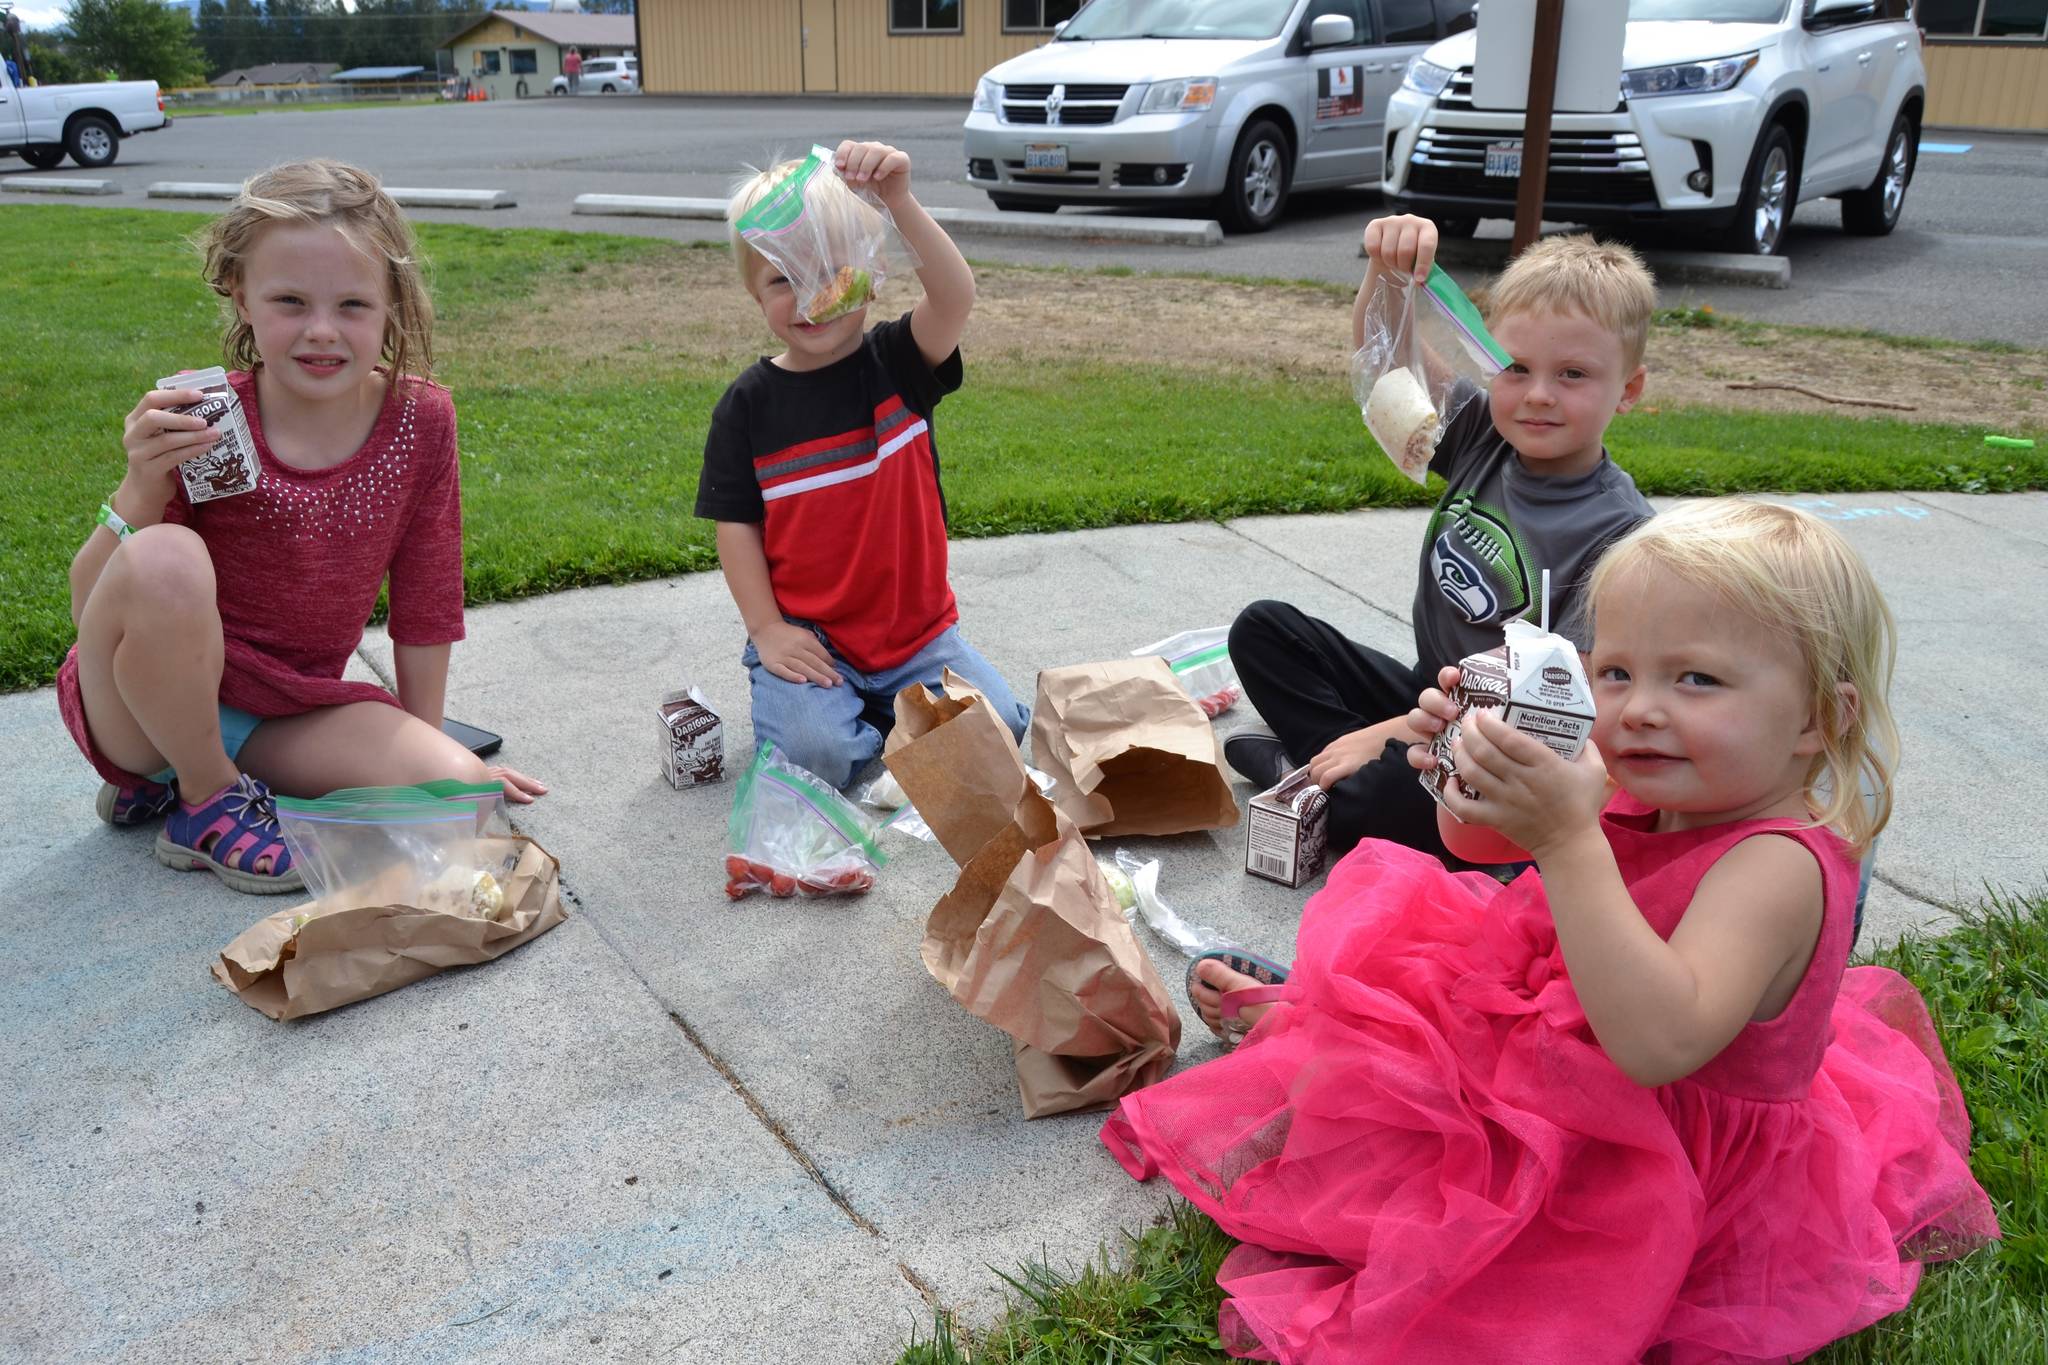 For lunch time it’s family time as Susan Coffee, not pictured, gathers her grandchildren, from left, Grace Dormer, 7, Sawyer Bushy, 4, Bradly Dormer, 5, and Malta Bushy, 2, at Carrie Blake Community Park on Aug. 27. Coffee said she and her grandchildren visited the park often to enjoy the Summer Food Program. Sequim Gazette photo by Matthew Nash